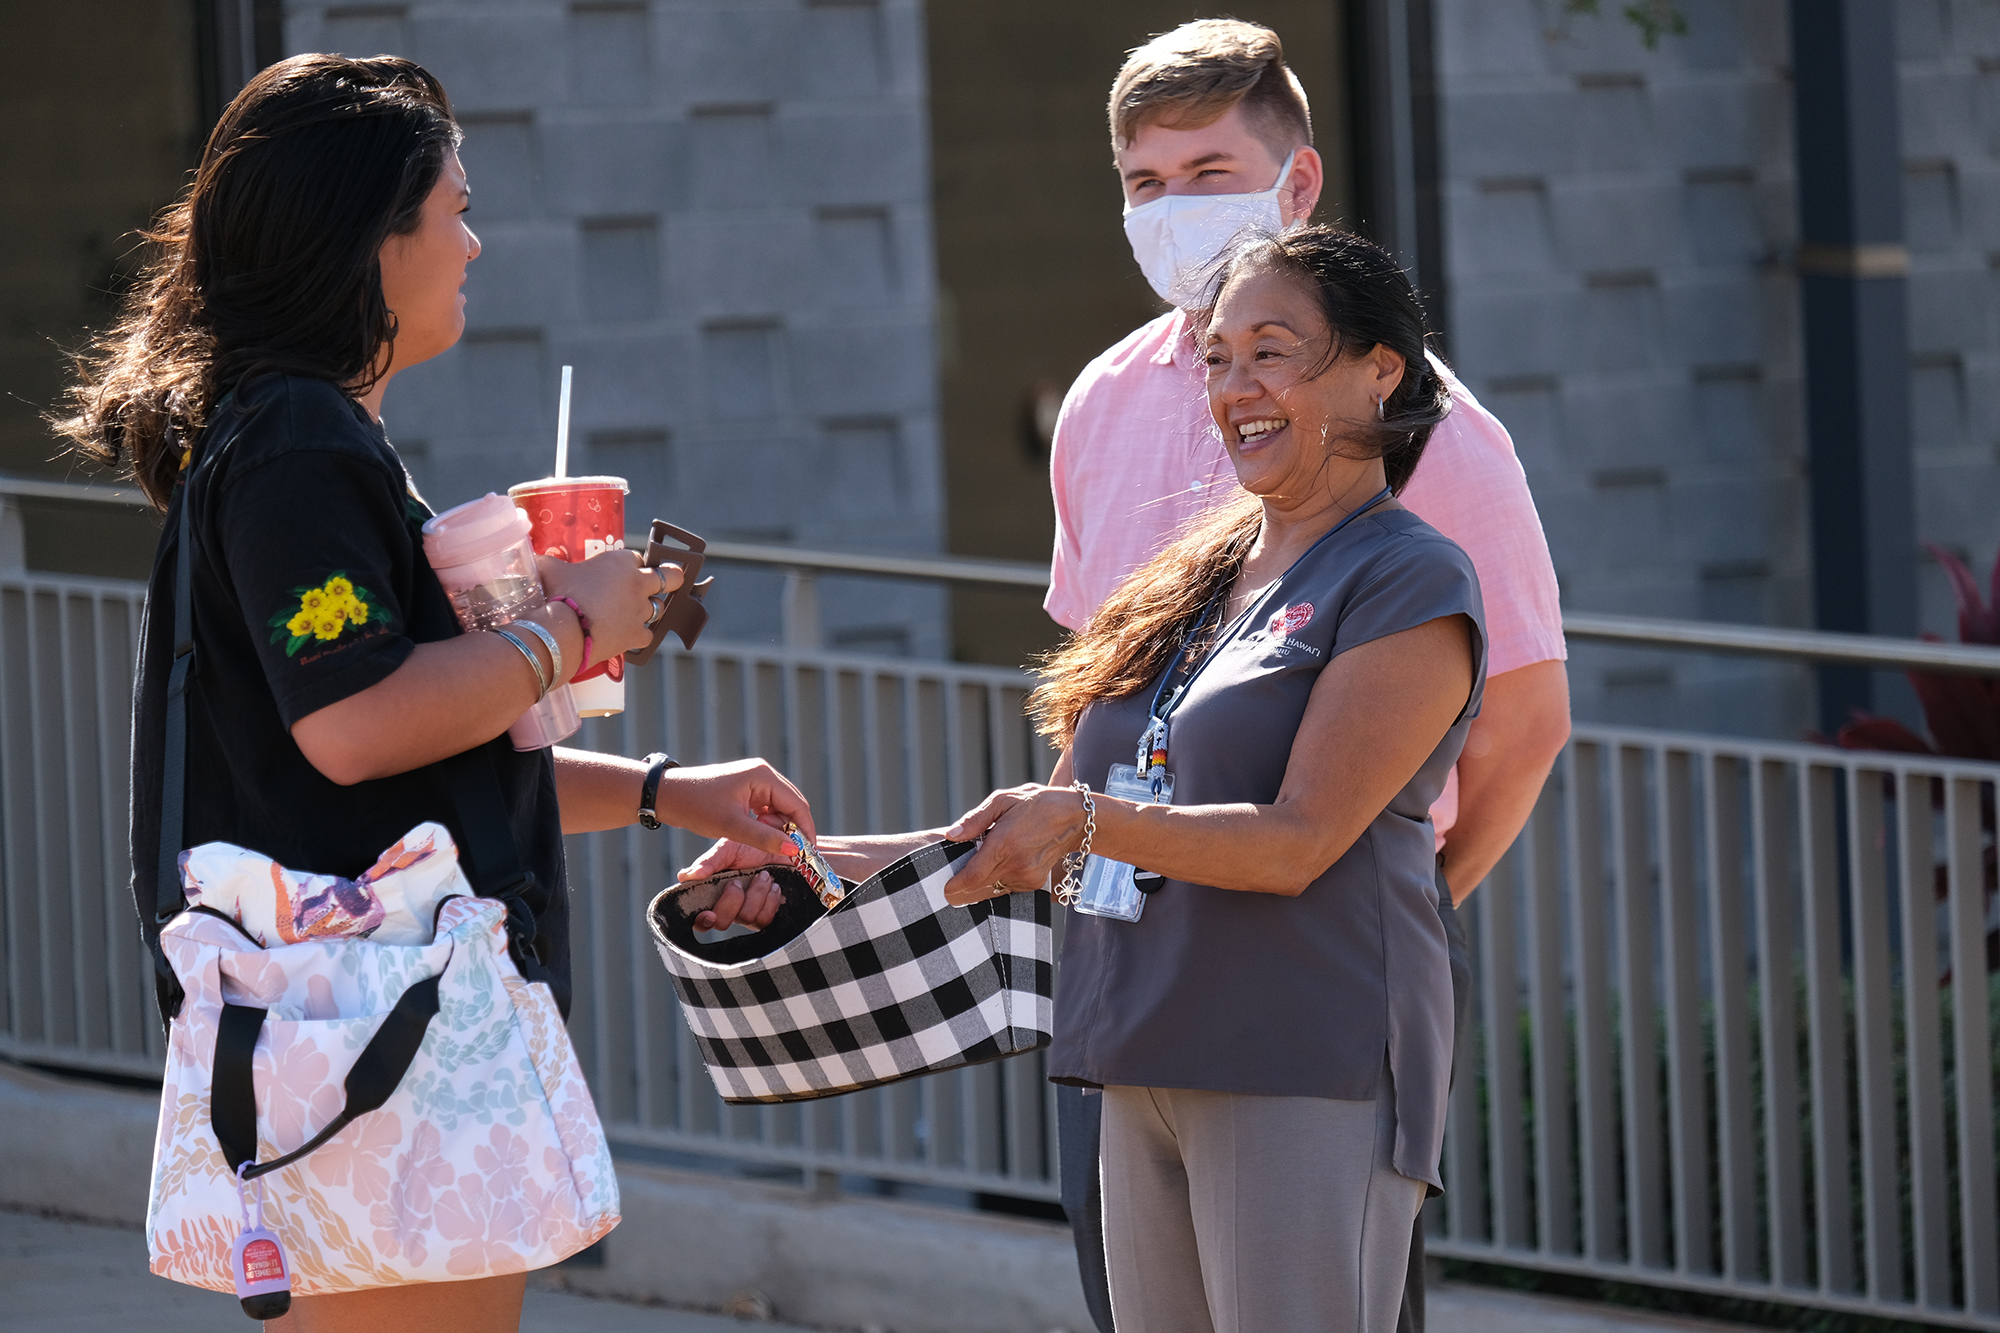 Chancellor Benham greets a student near the campus entrance on the second day of the Fall 2023 semester.